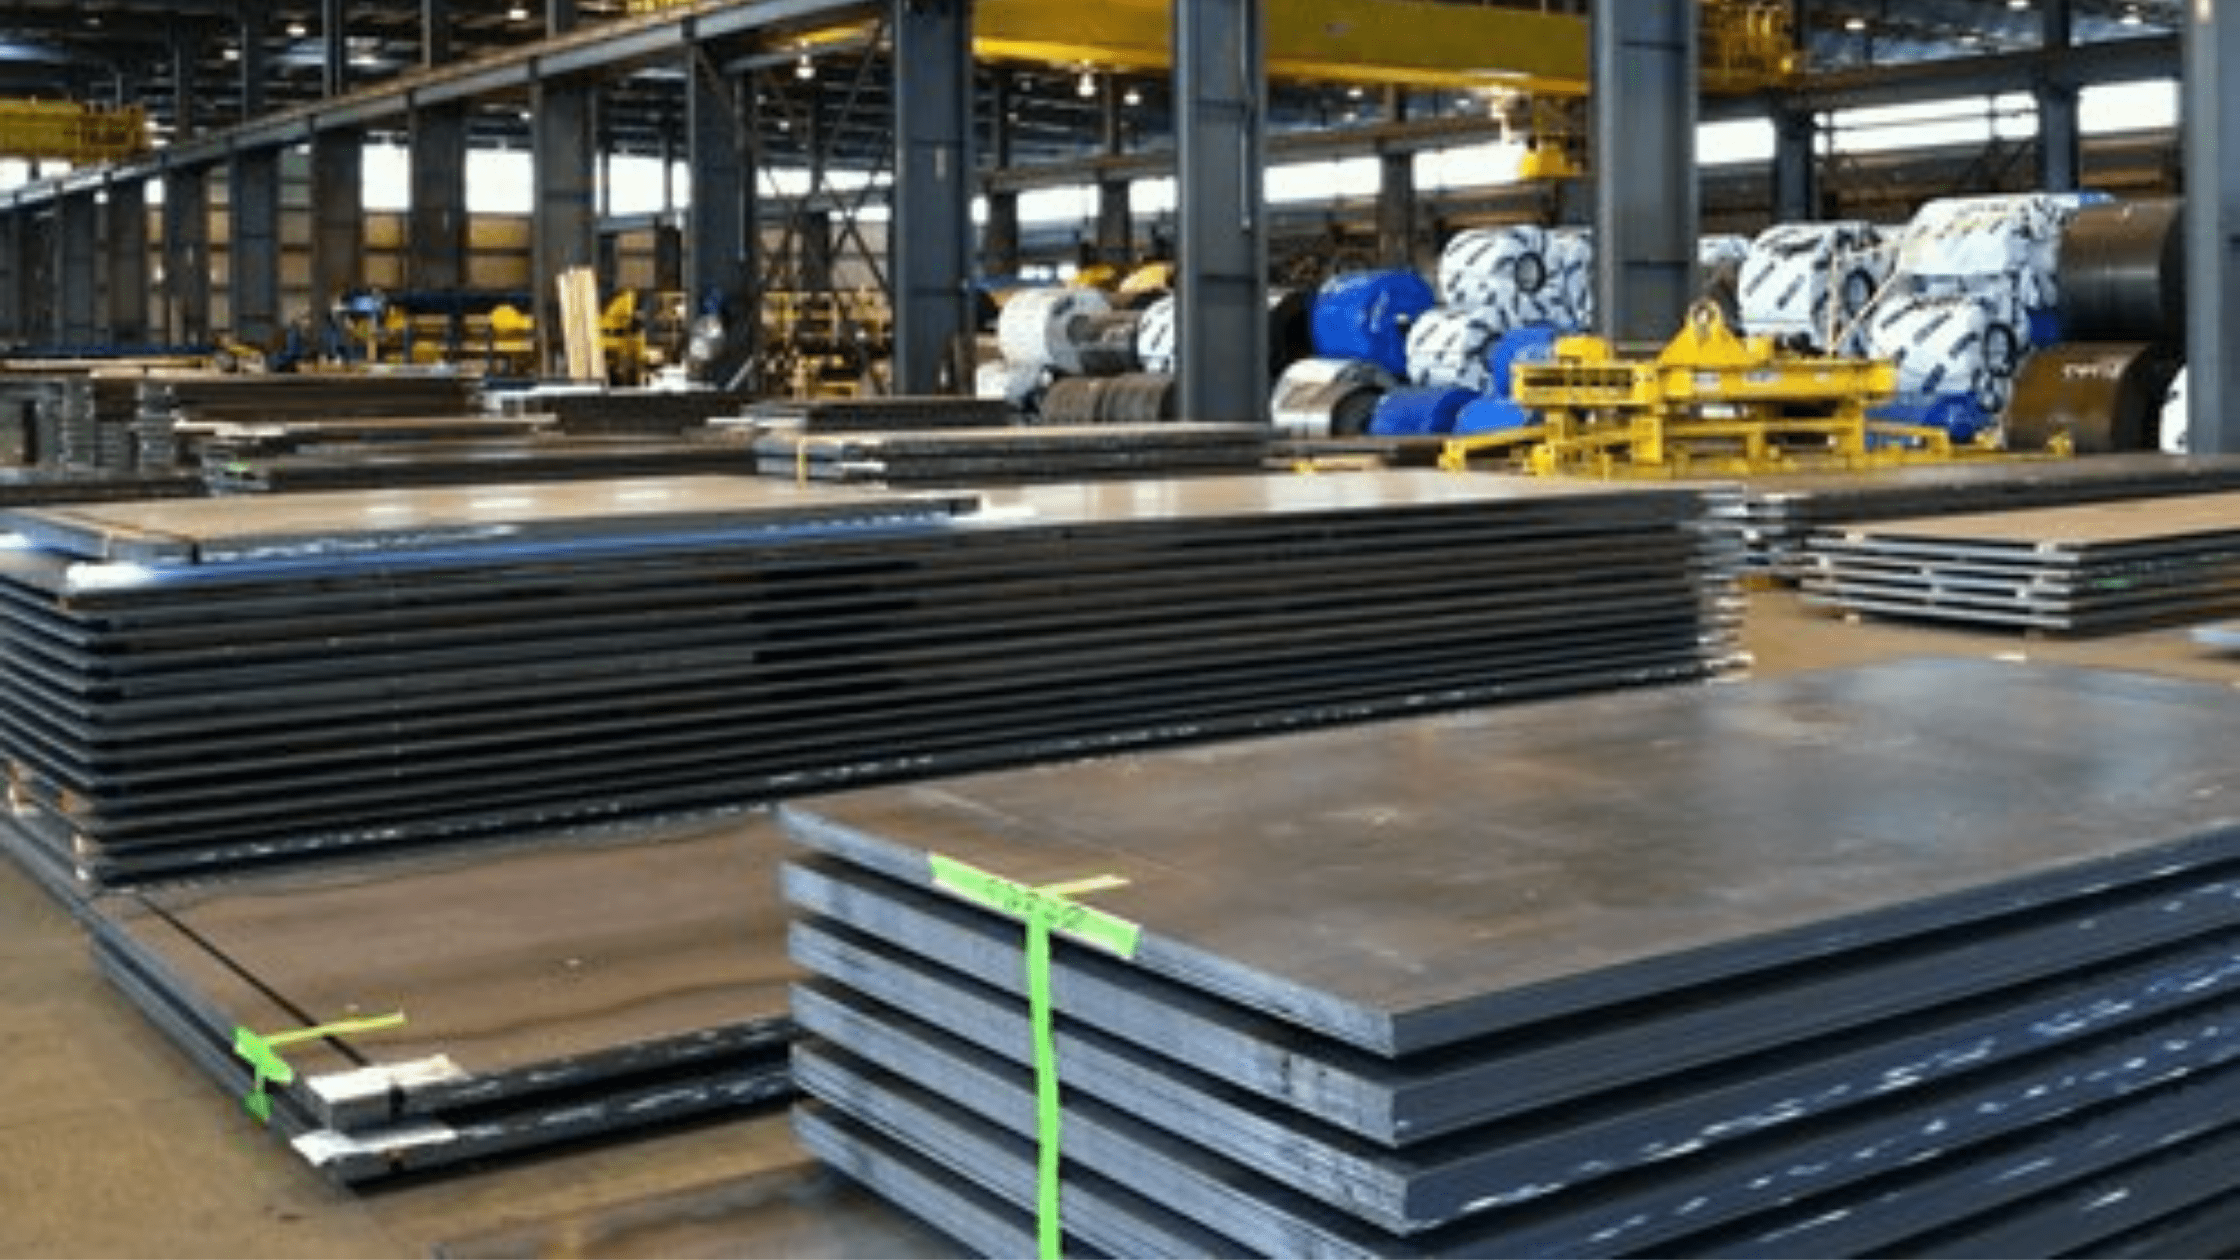 Boiler Steel Plates Evolution And How It Is Used In Today’s Life?